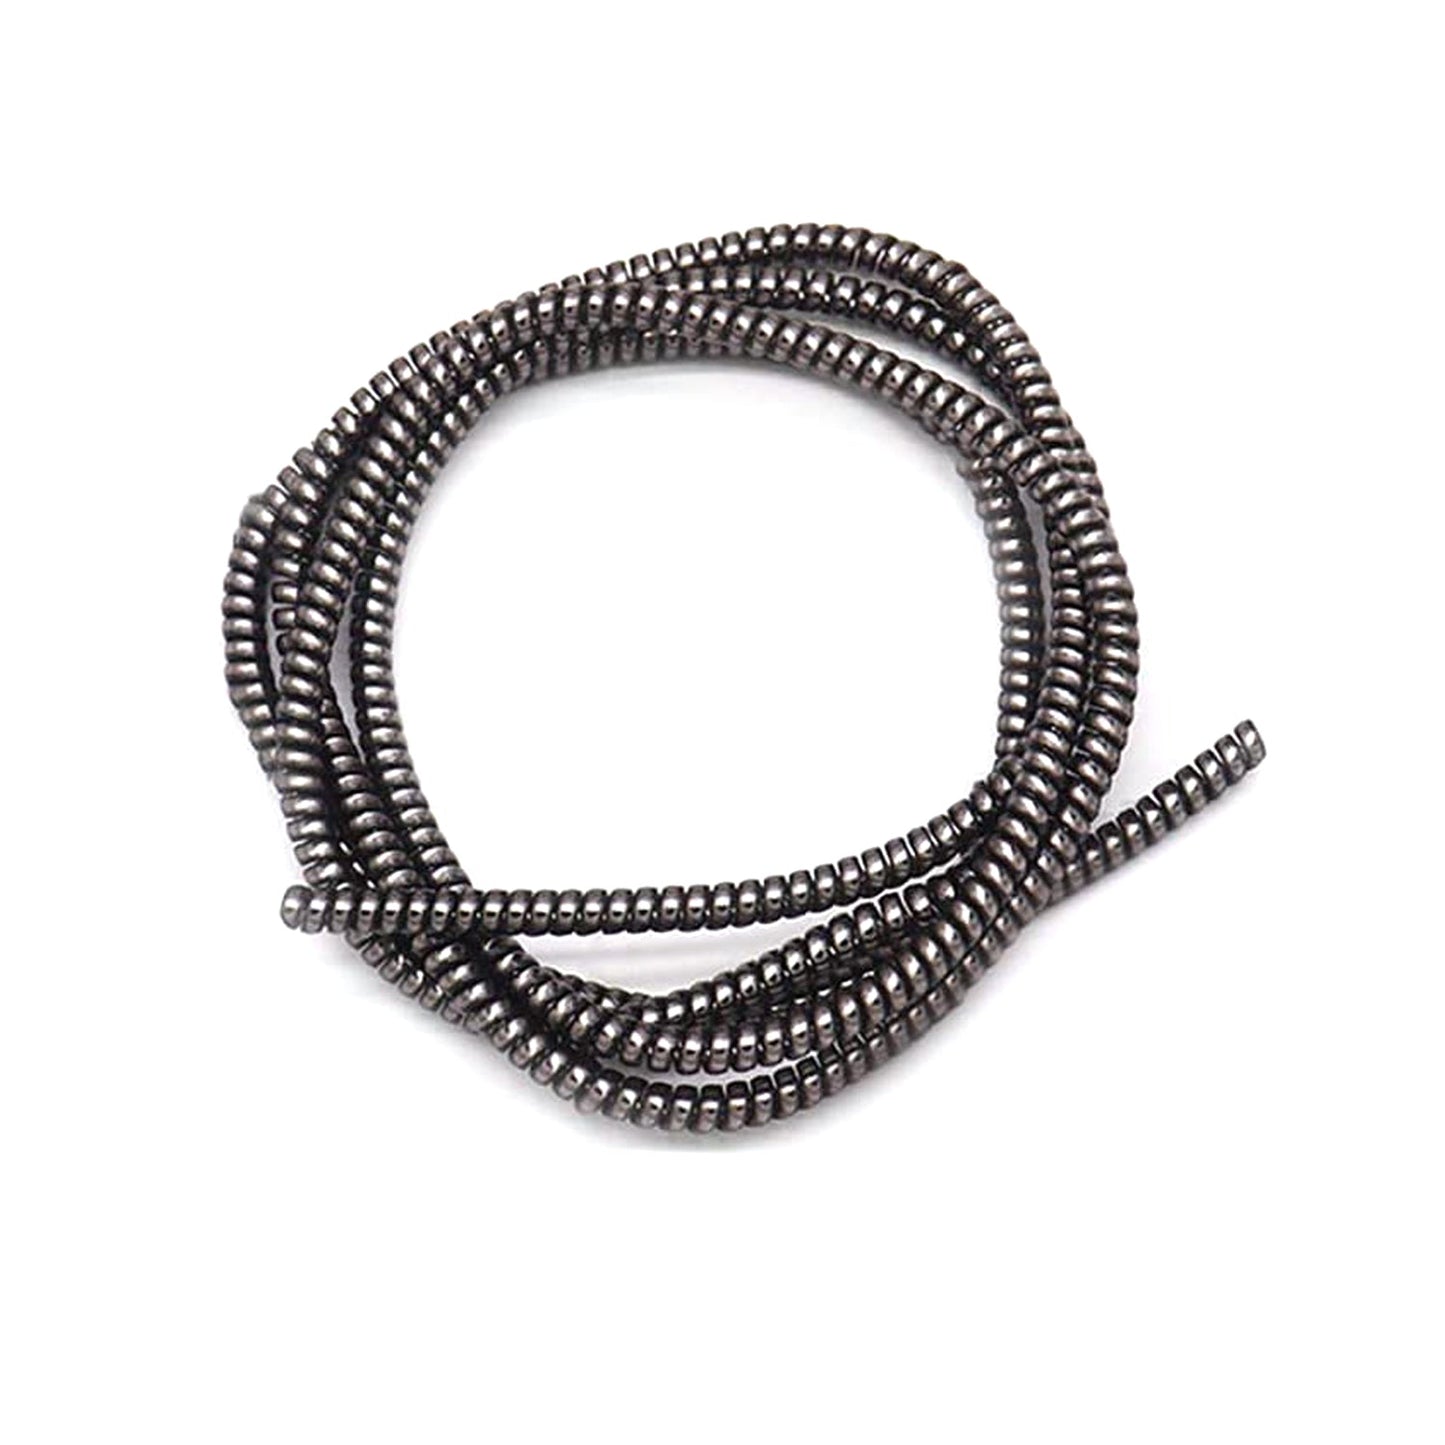 Metallic Finish Cable Spiral Protector/Wire Repair/Pet Cord Protector/Headphone Saver, Cable Wrap/Cover for Mac Charging Cable